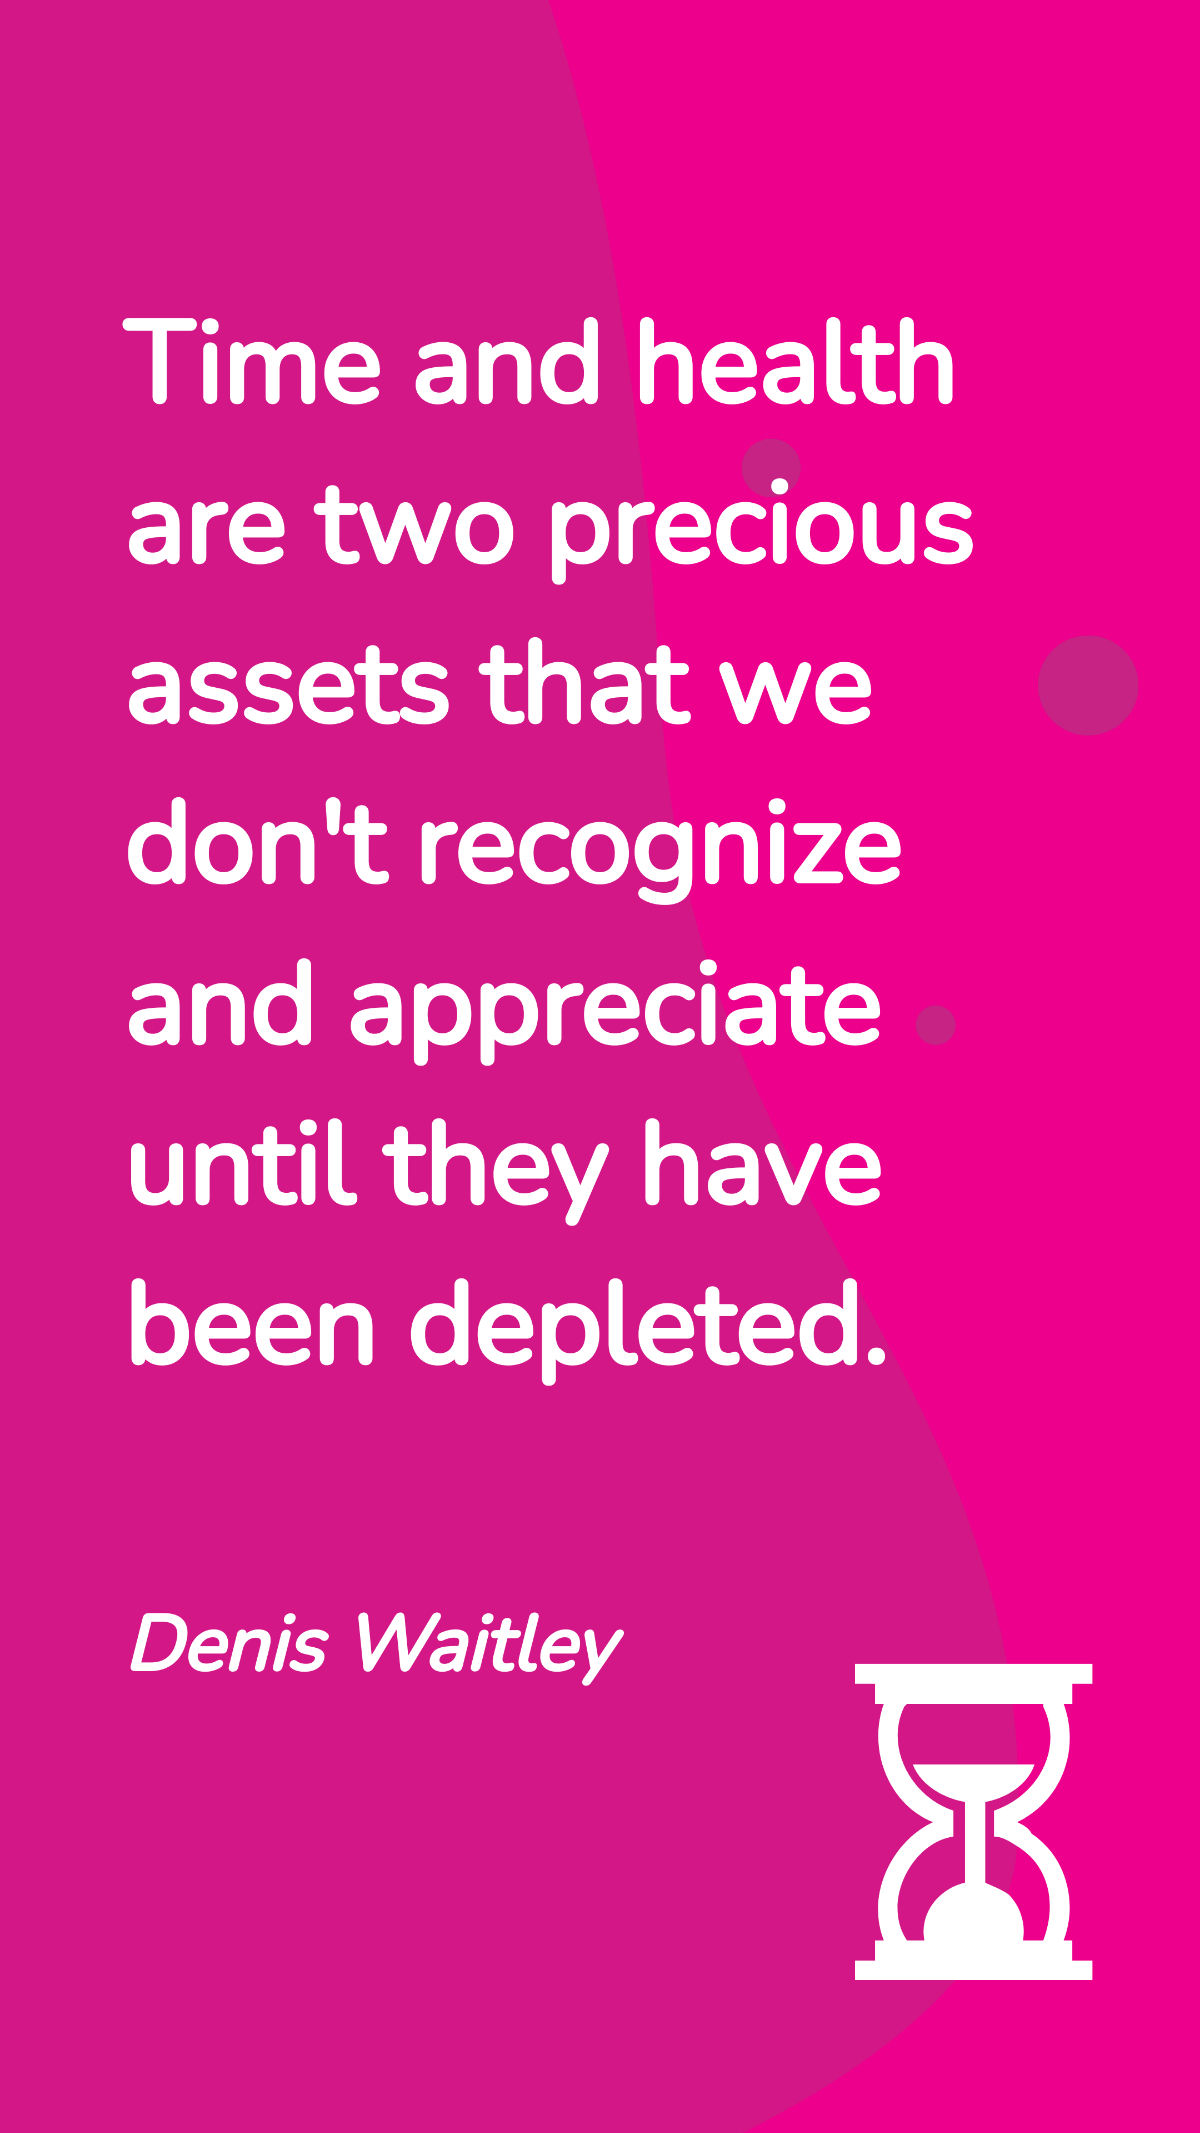 Denis Waitley - Time and health are two precious assets that we don't recognize and appreciate until they have been depleted.